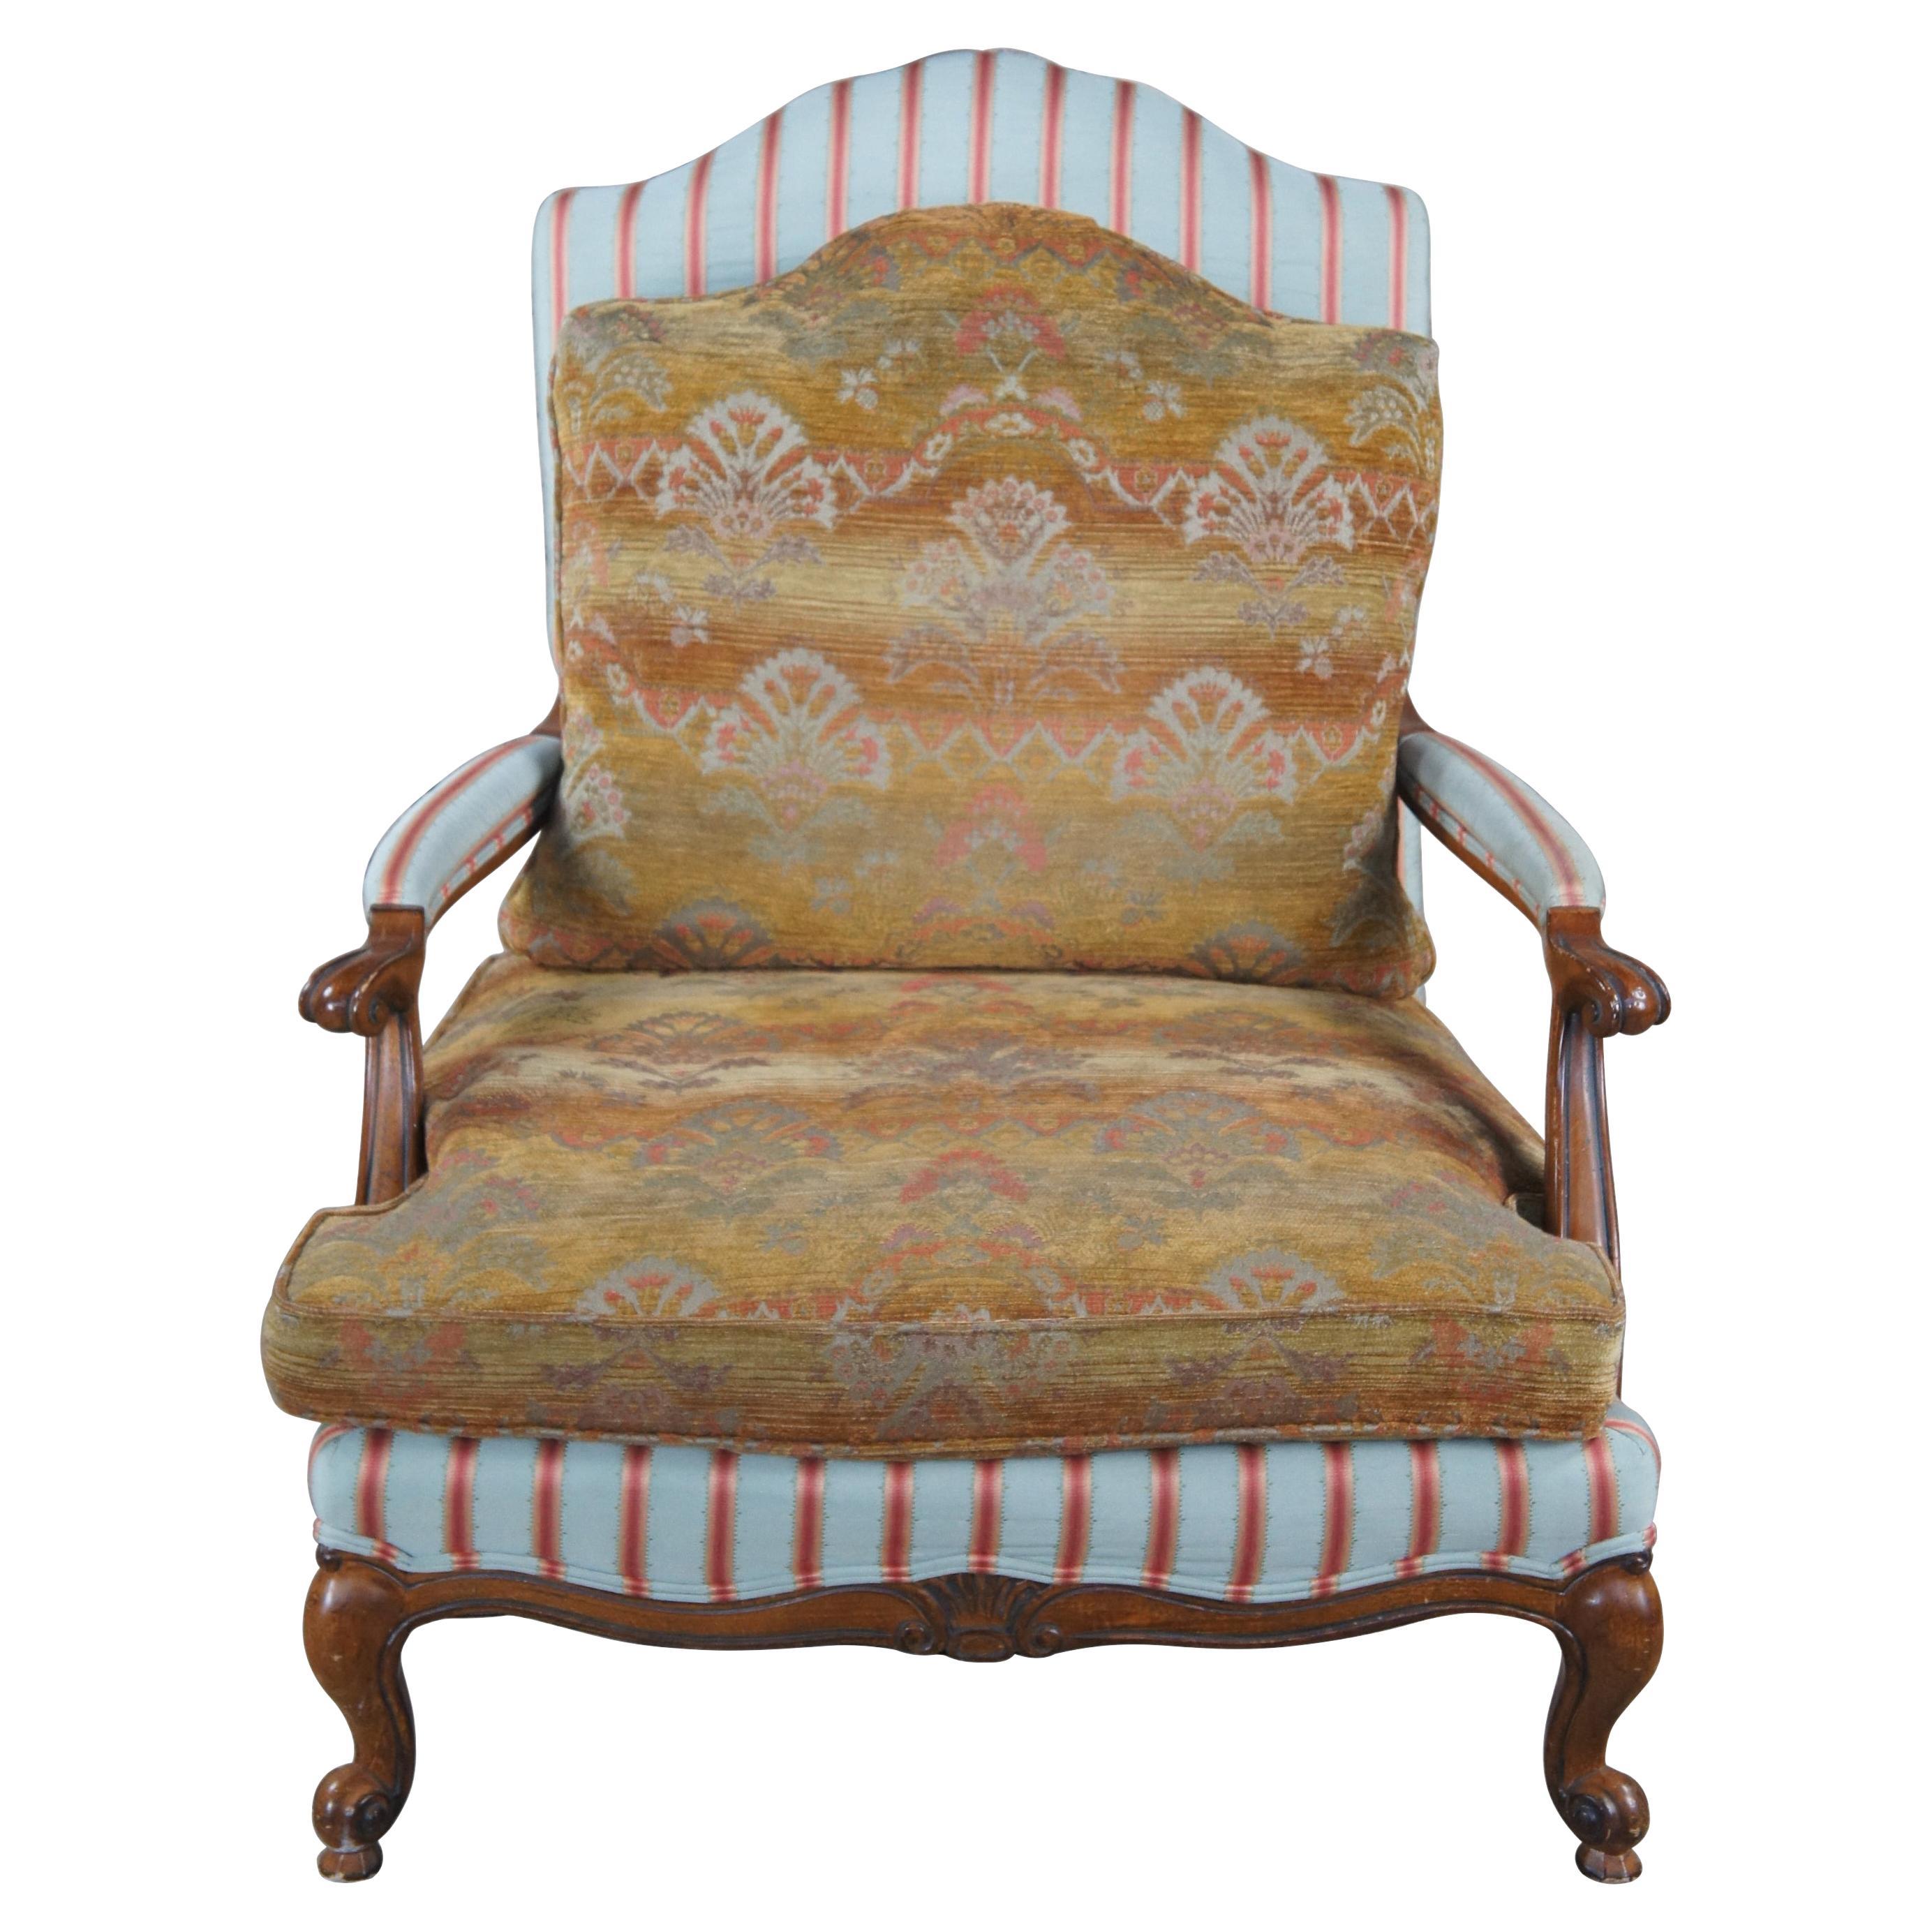 Wesley Hall French Louis XV Versailles Bergere Striped Oversized Armchair 42"